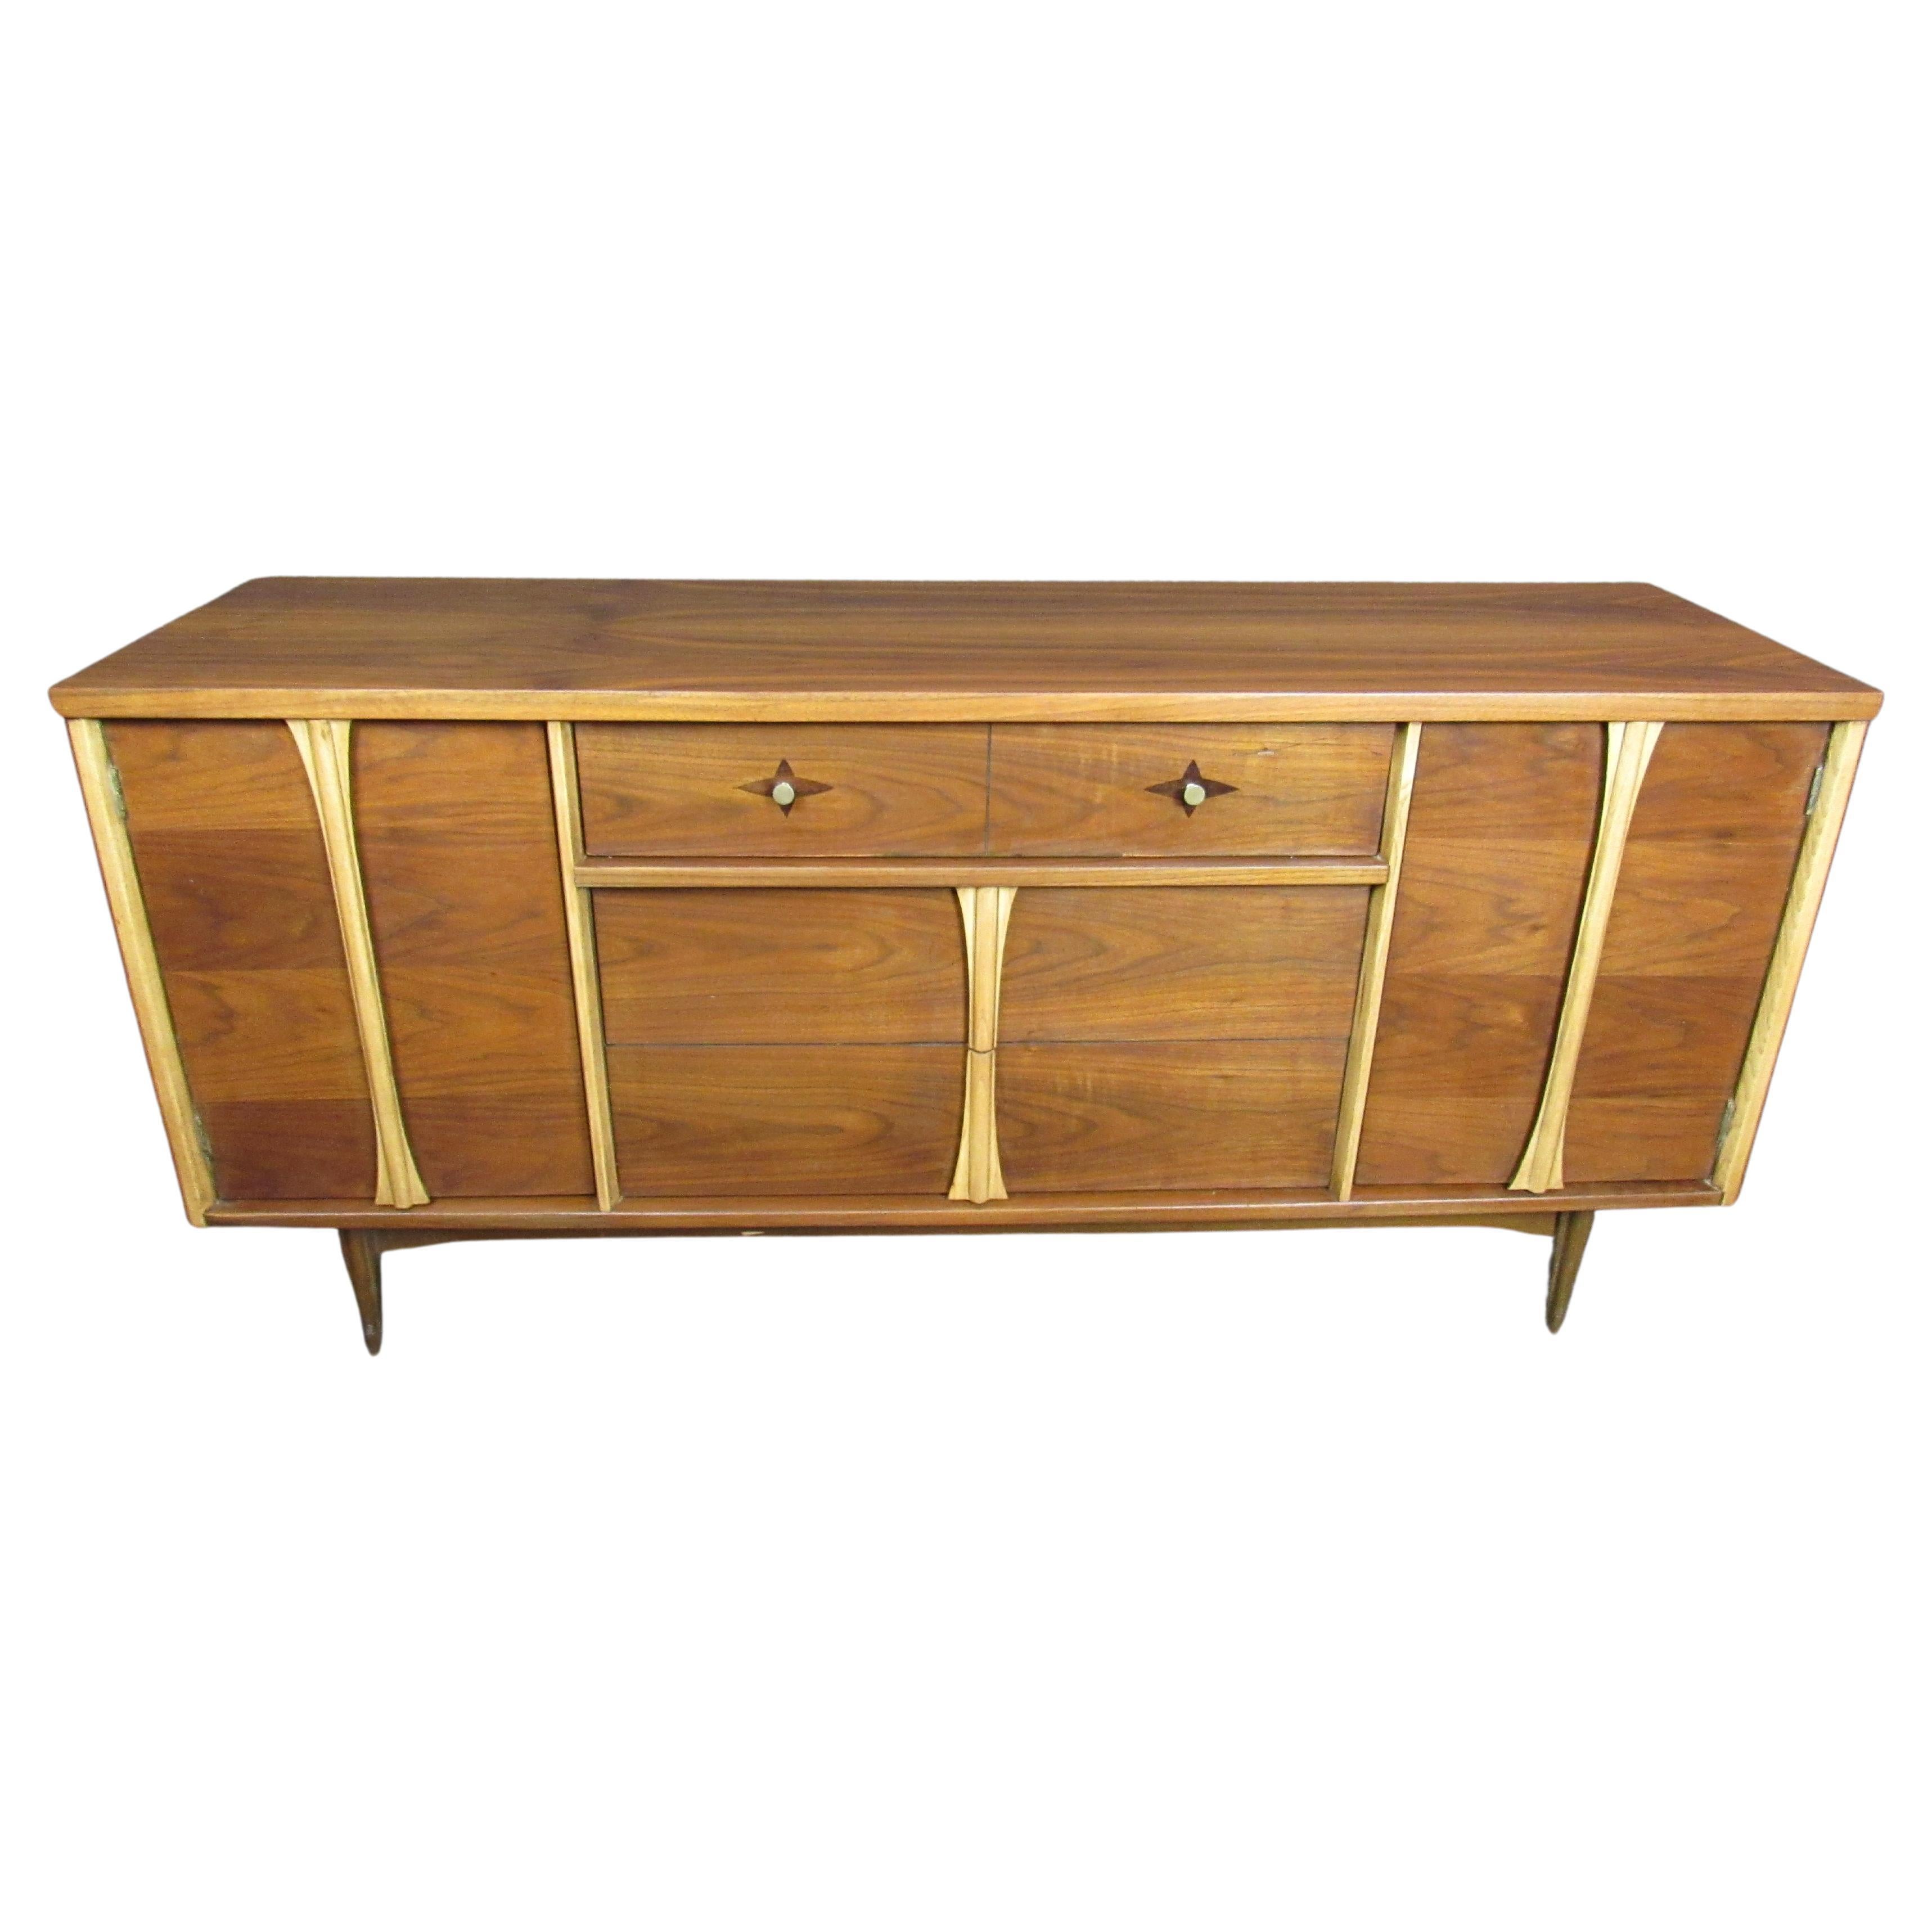 Mid-Century Modern long dresser designed by Leo Jiranek for Bassett Furniture. Made for the Context Collection, featuring offsetting woods and tones. Warm, walnut grain with oak trim and rosewood inlay diamonds. 
Please confirm location.